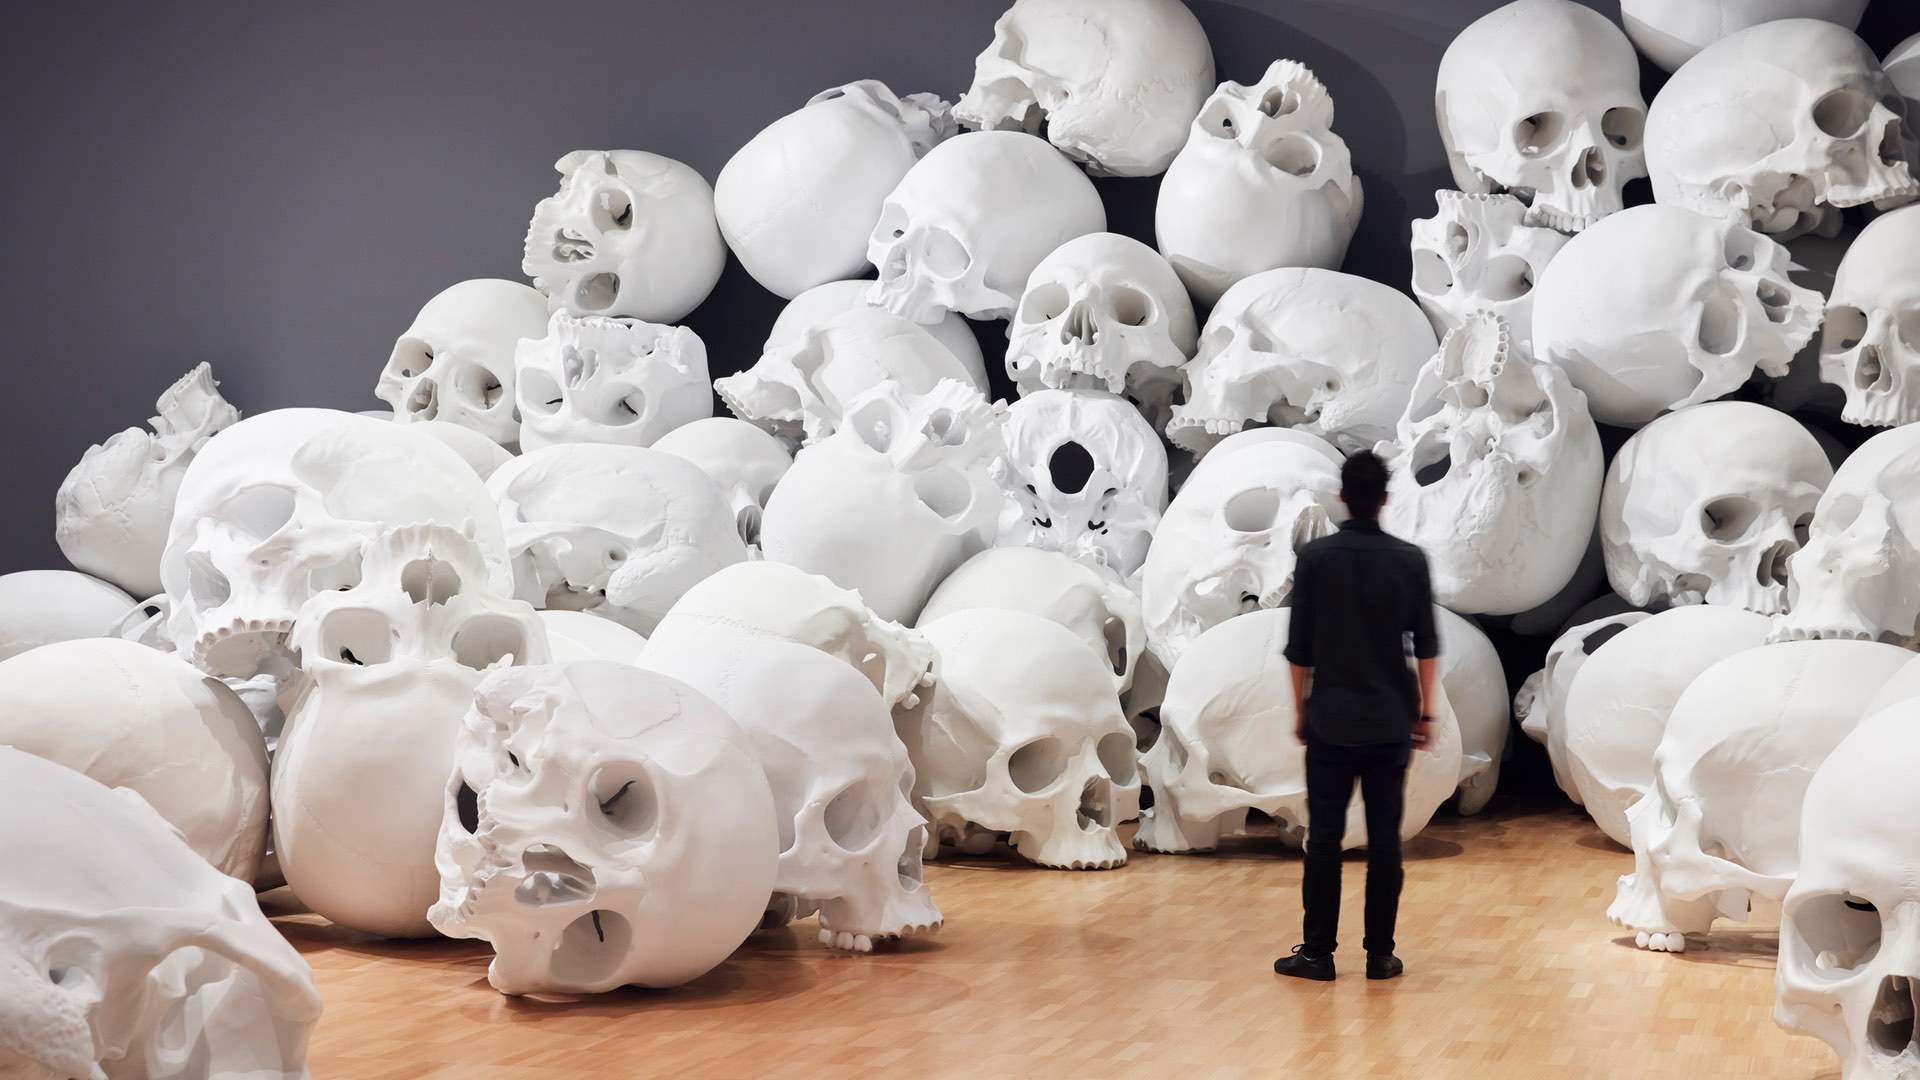 Gallery: A Look Inside the NGV's Hugely Ambitious New Exhibition, the NGV Triennial